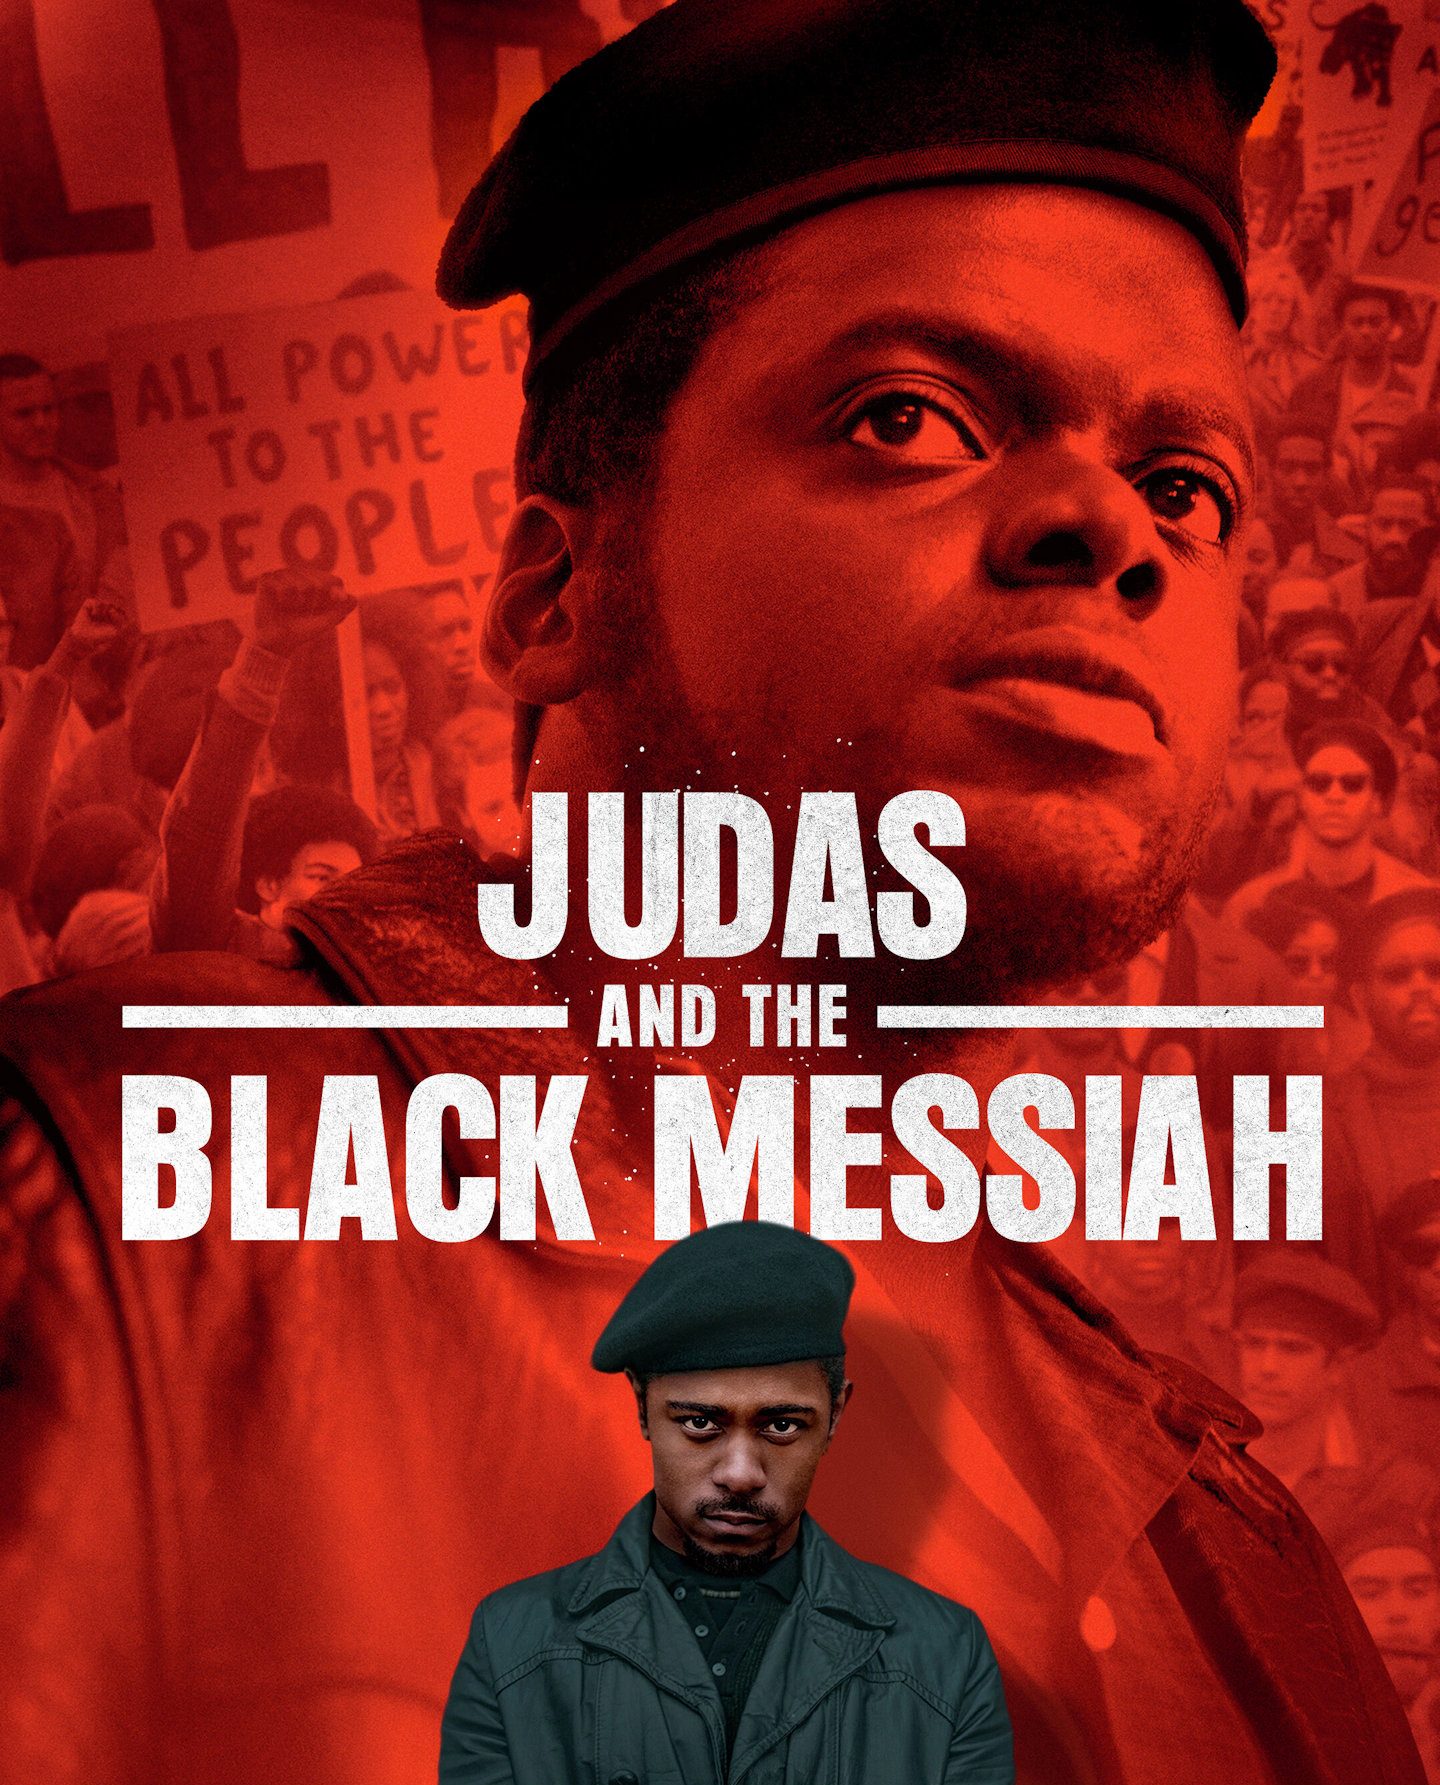 Judas and Black Messiah in home-video